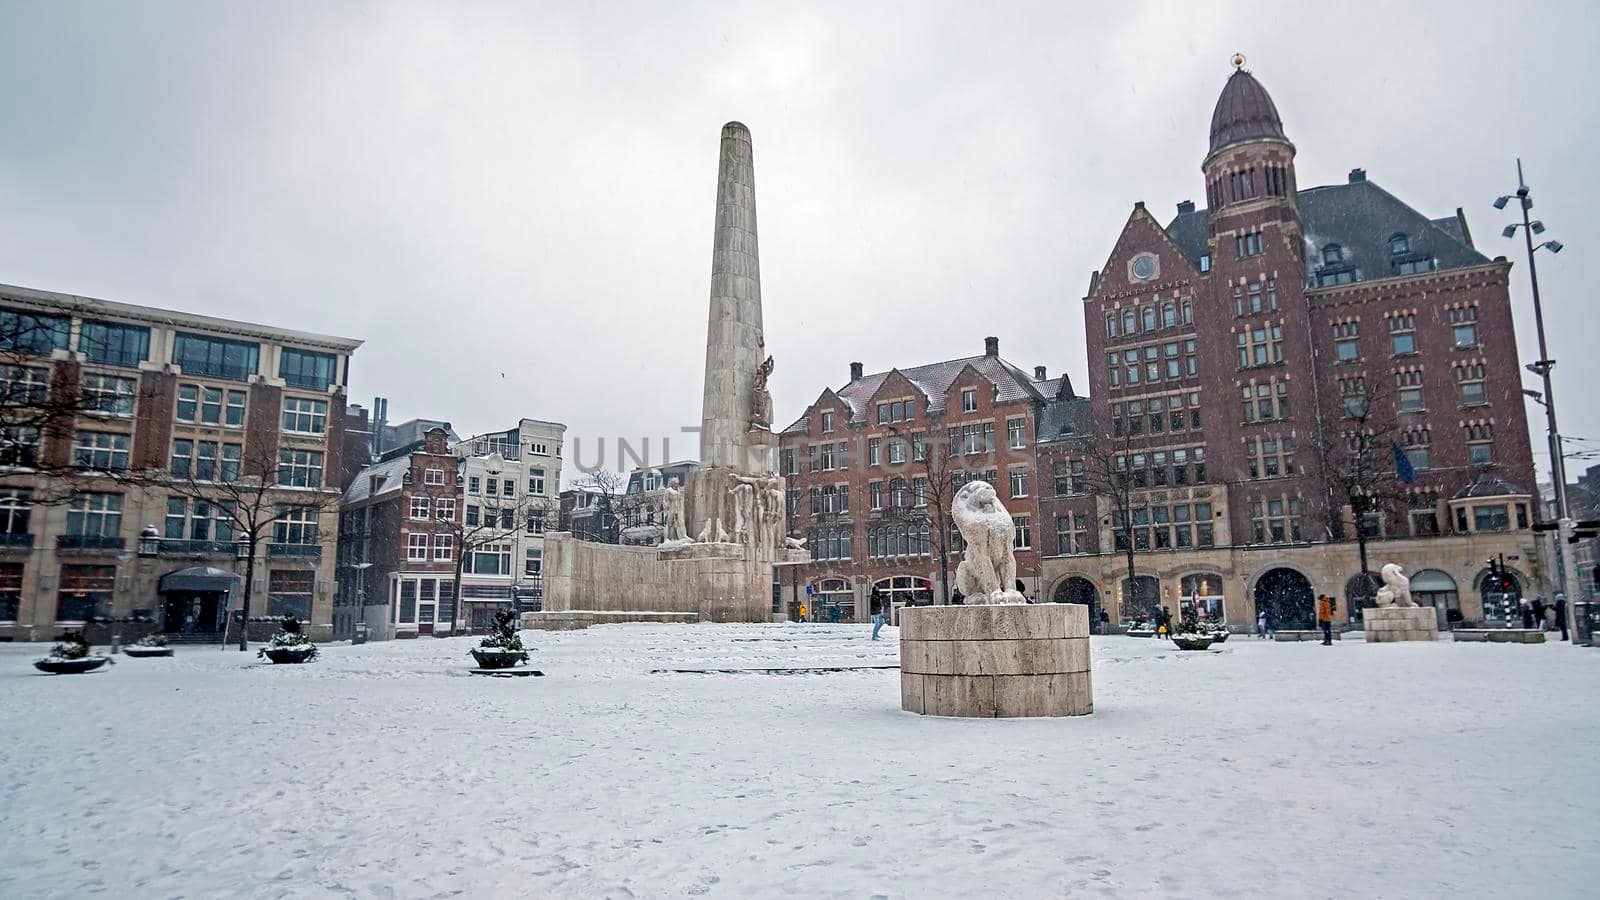 Snowy city Amsterdam at the Dam square in the Netherlands in winter